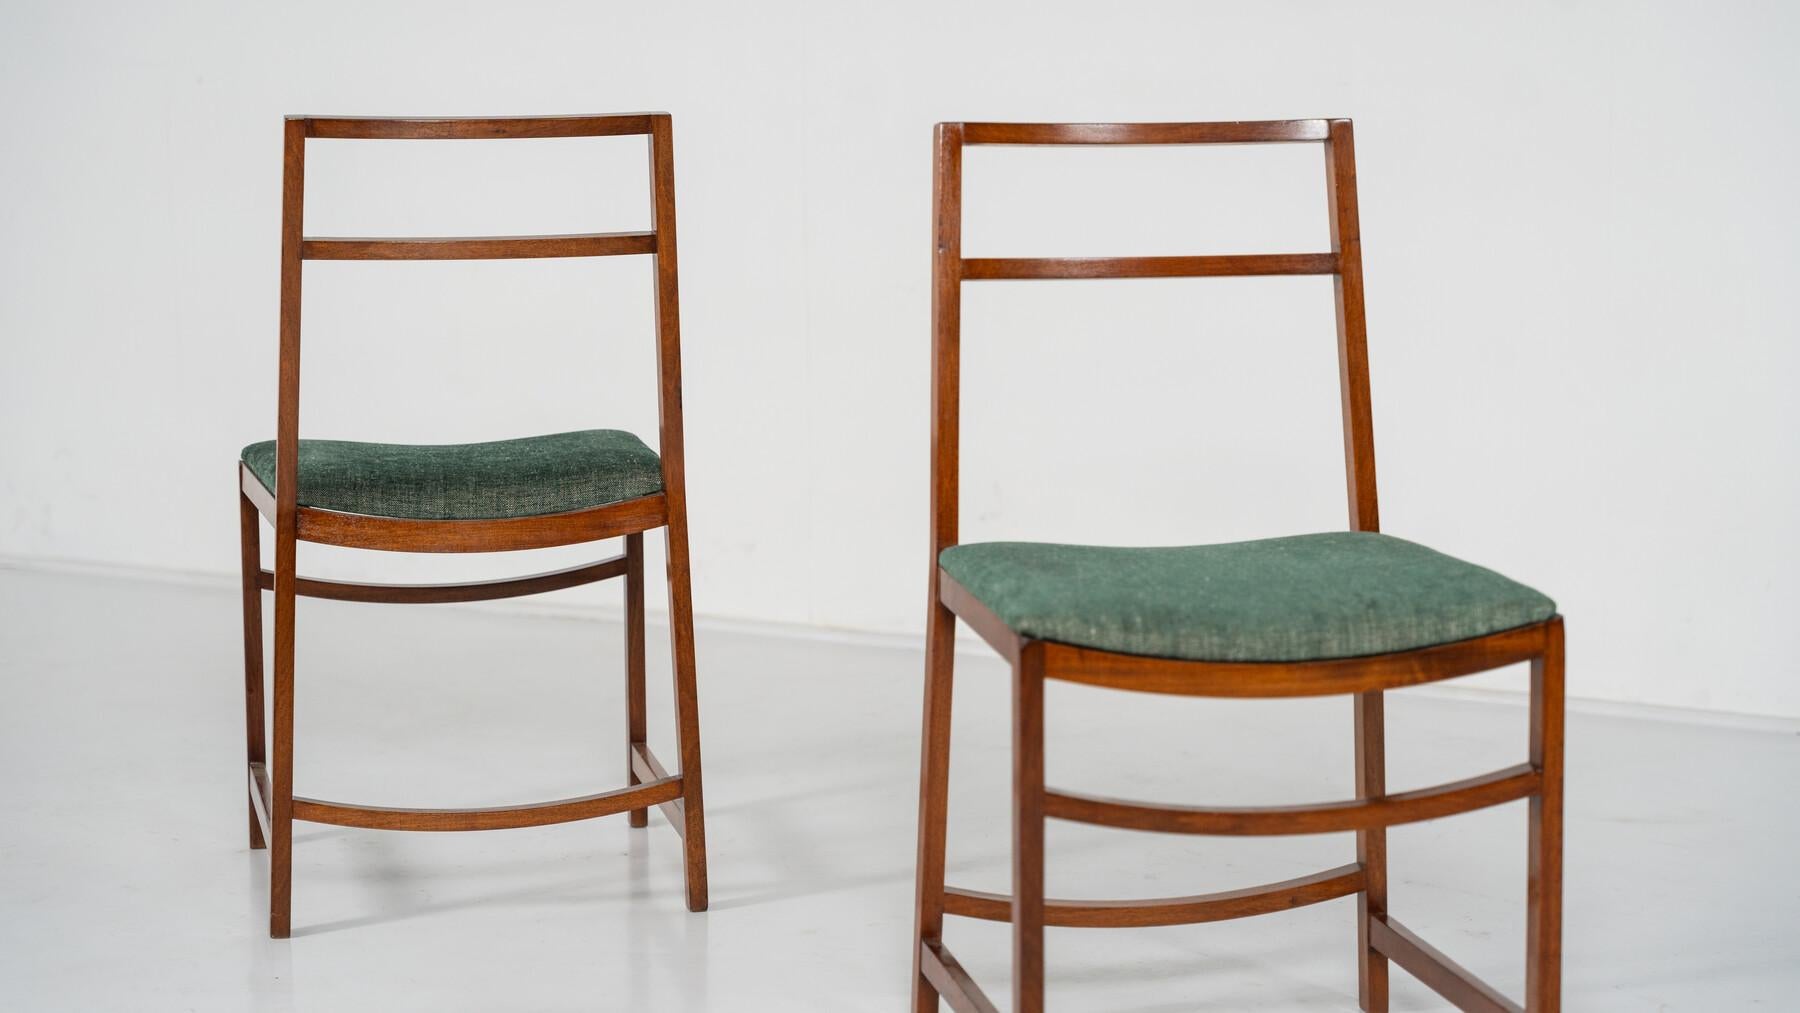 Set of 8 Mid-Century Modern Dining Chairs by Renato Venturi for MIM, 1950s For Sale 6